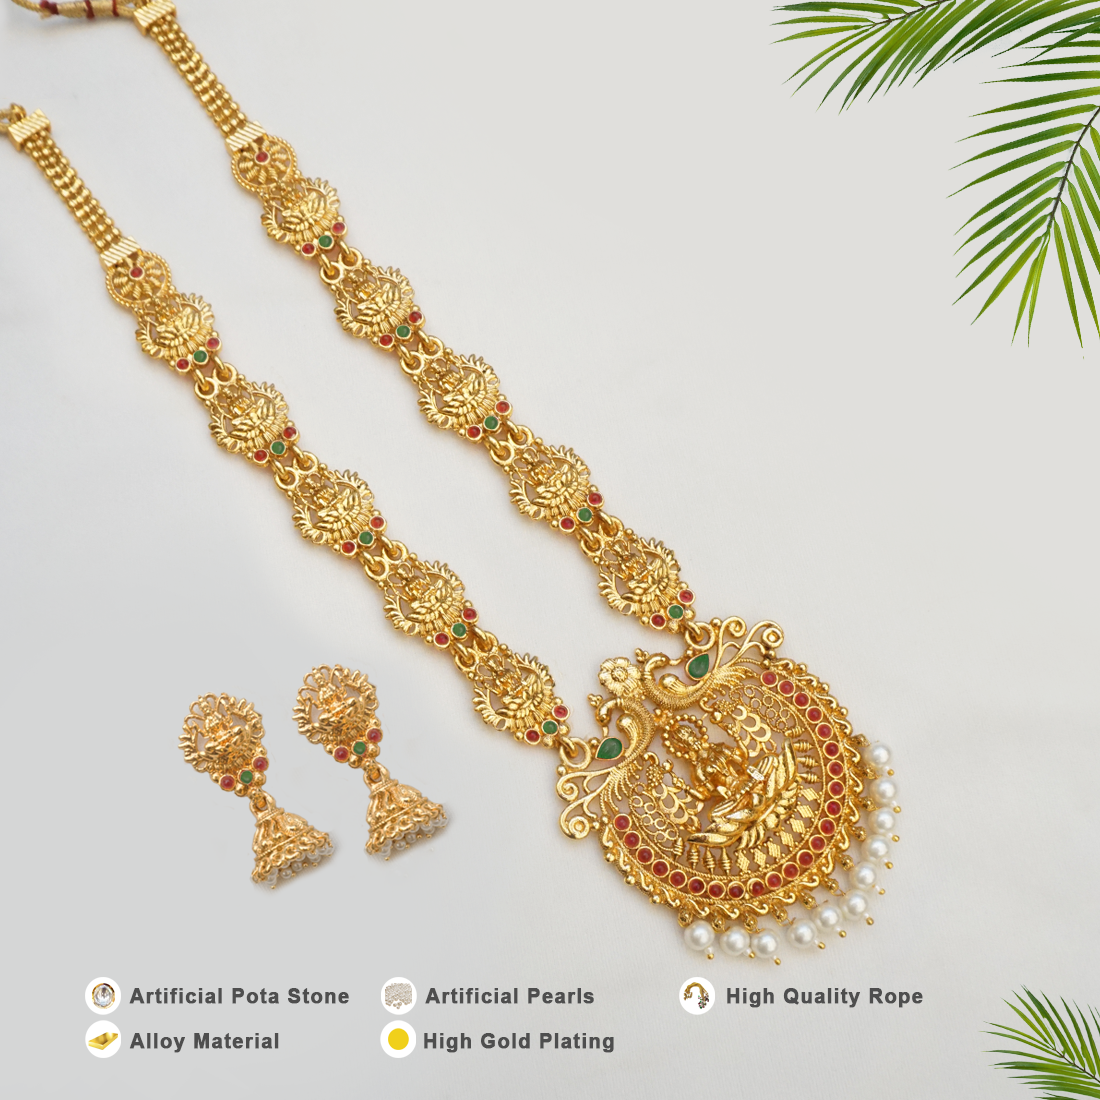 Alizé - 22K Gold Plated Long Chain, Gulaal Ethnic Indian Designer Jewels, Buy Necklace Online